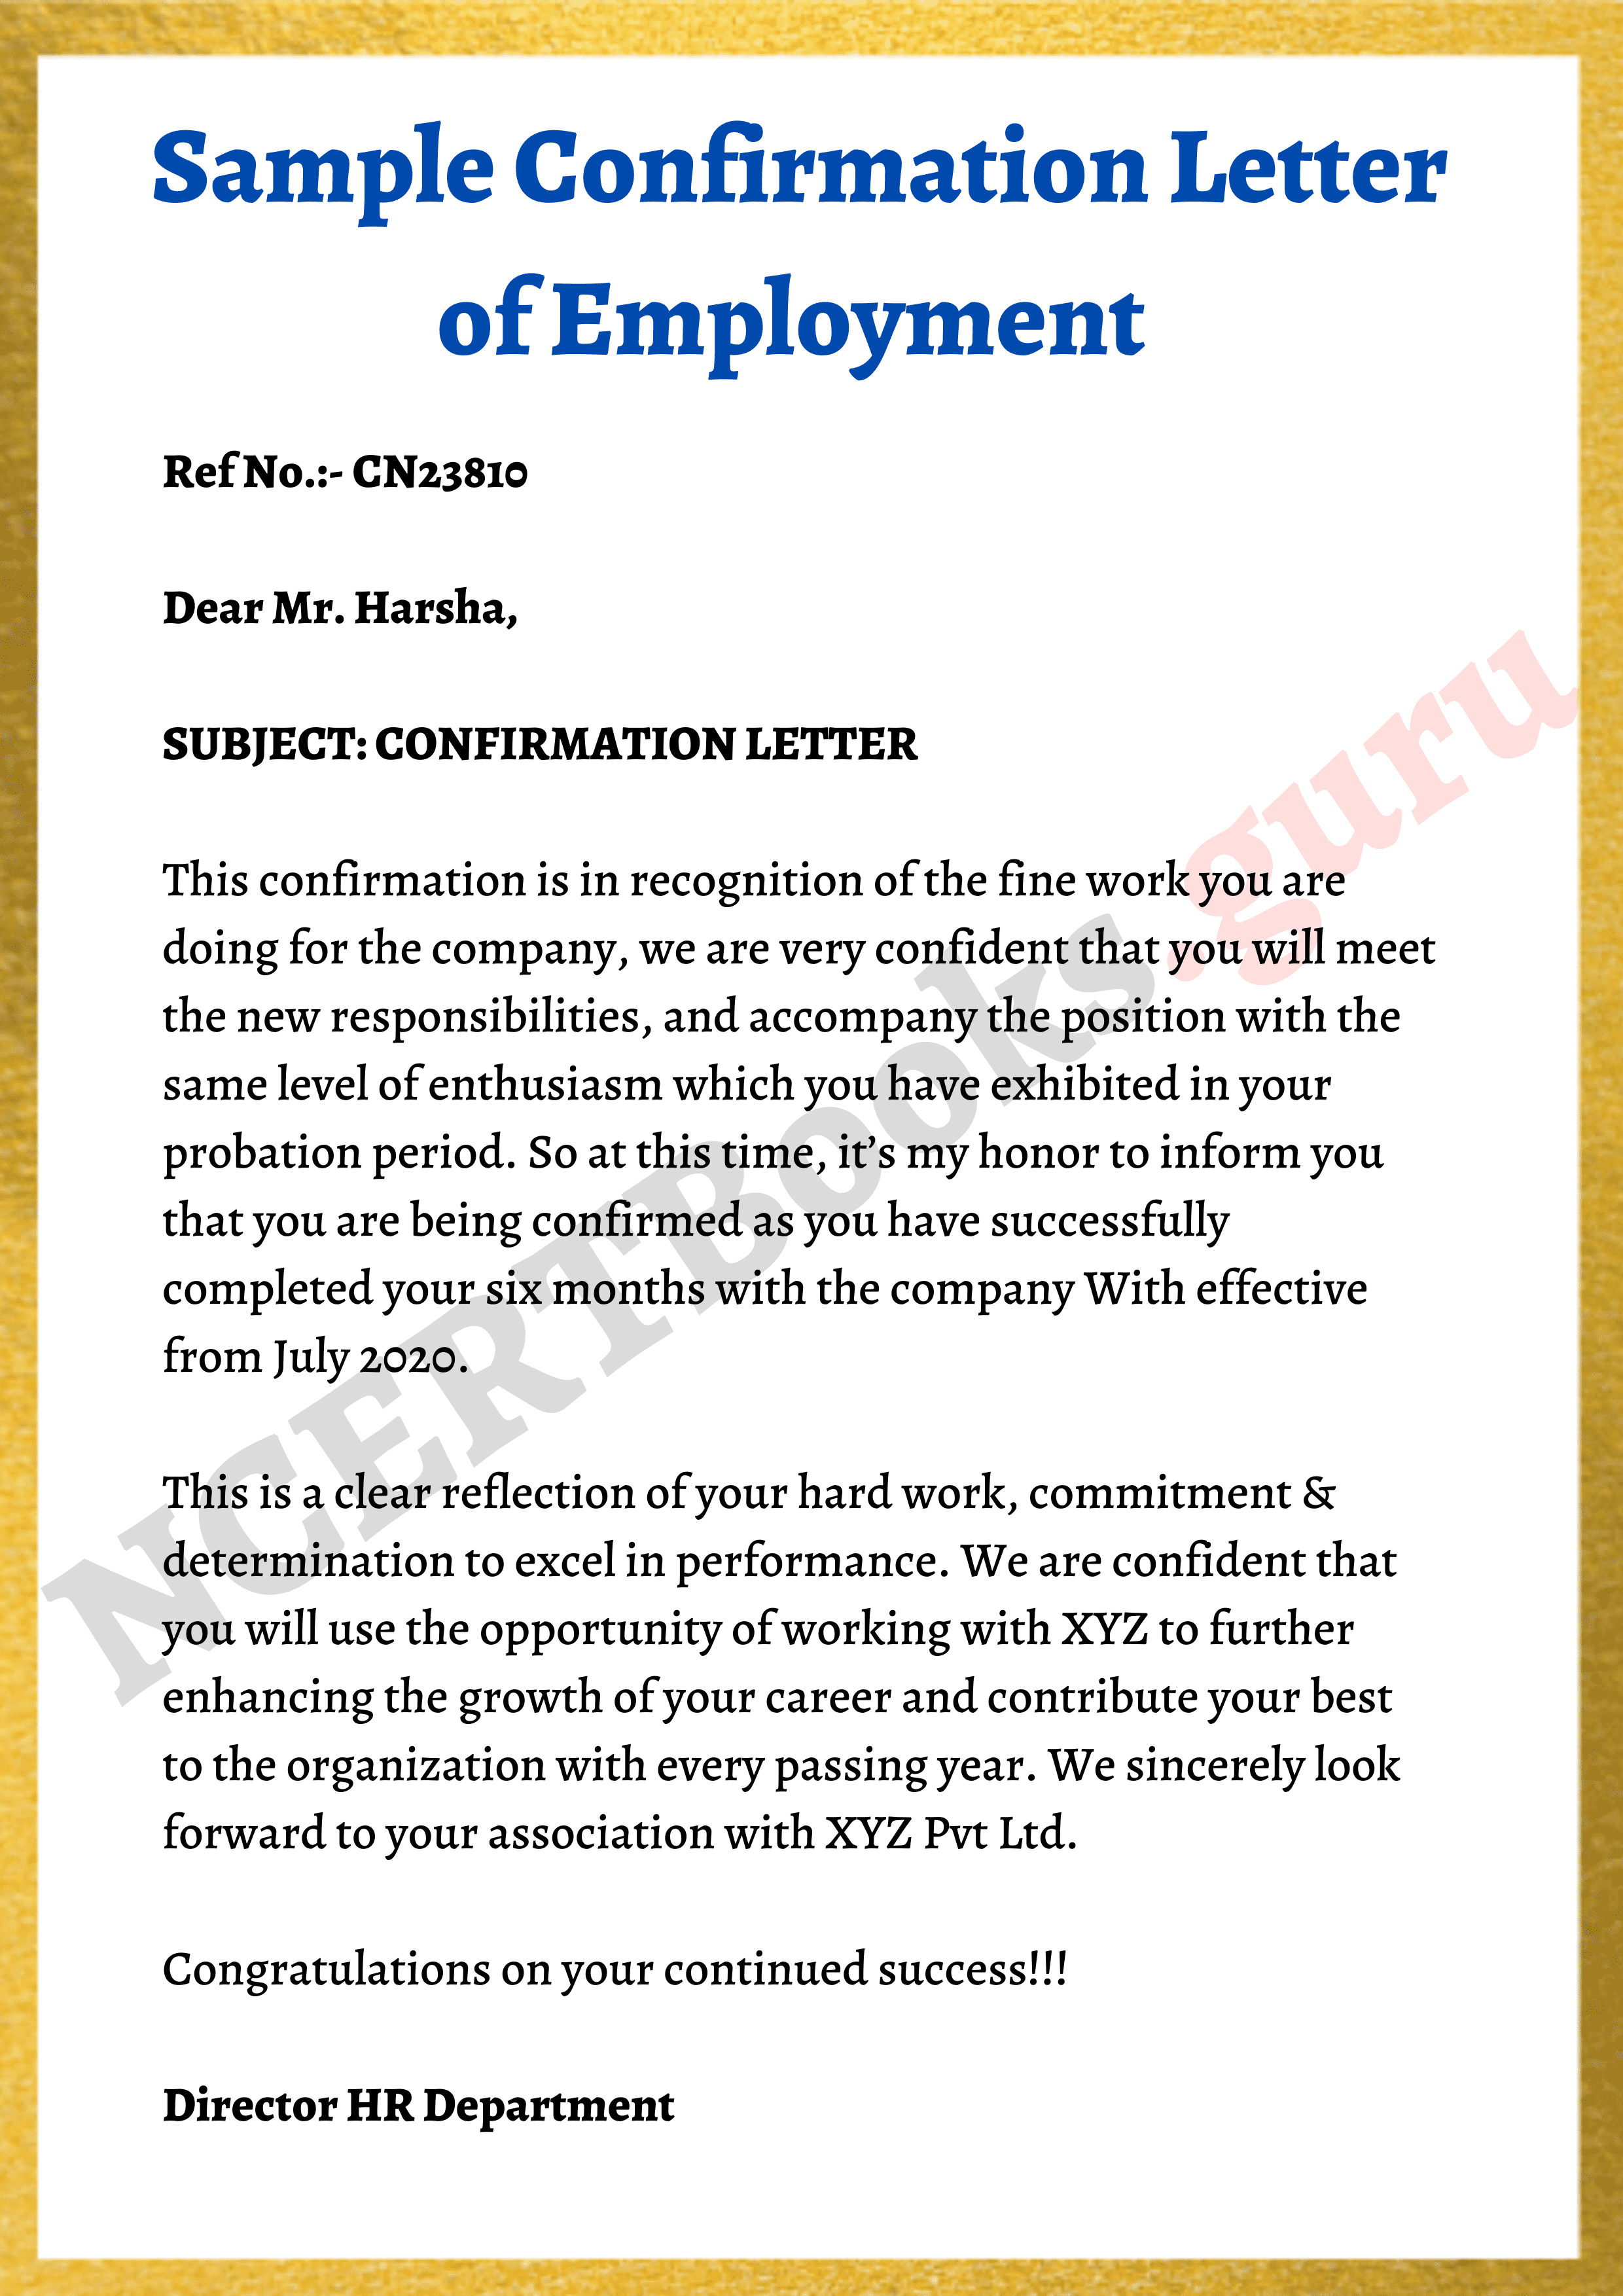 successful probation letter to employee sample